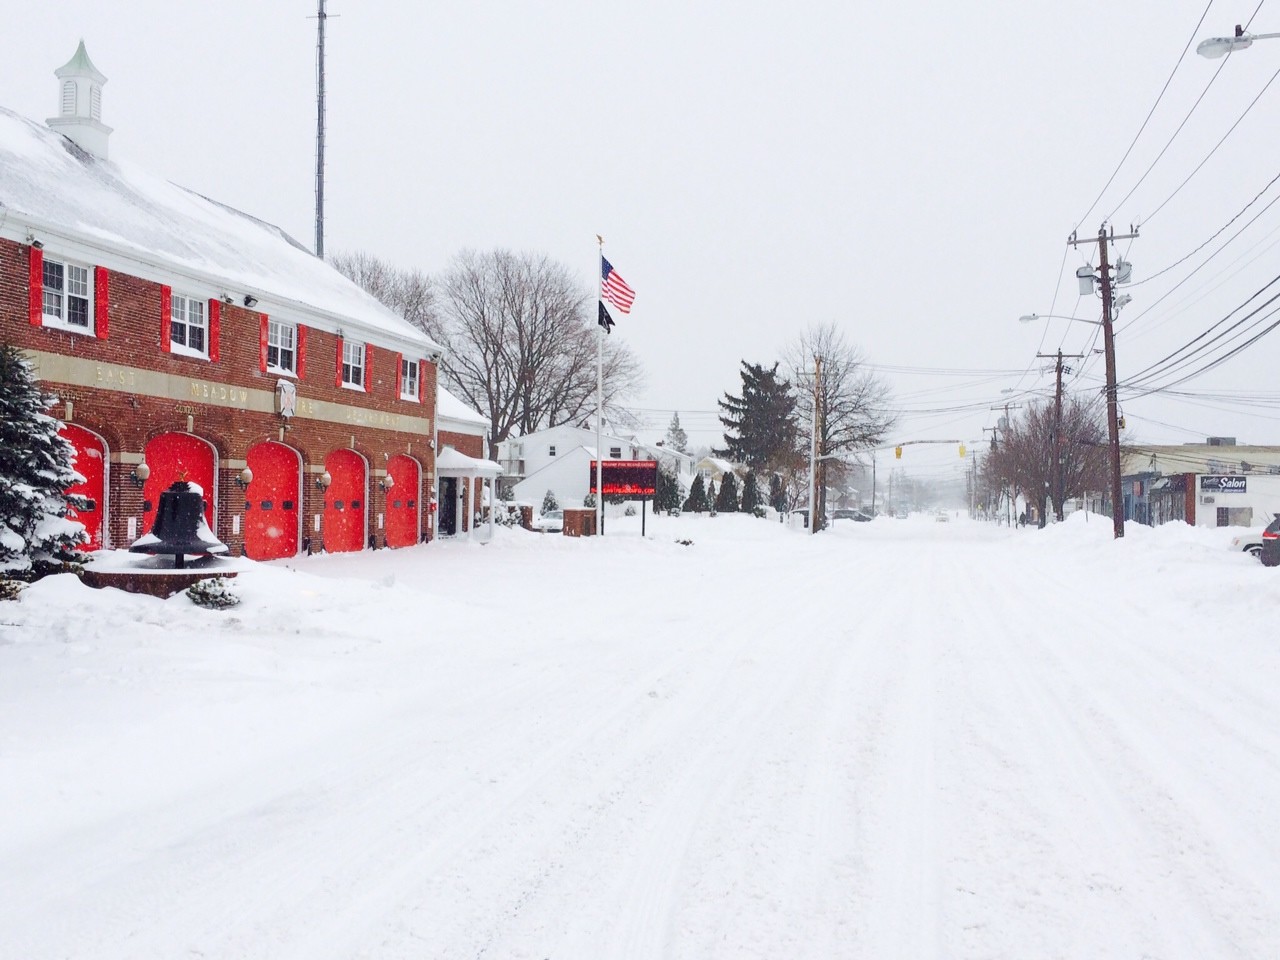 The East Meadow Fire Department's red brick building on East Meadow Avenue stood out among the snowfall.